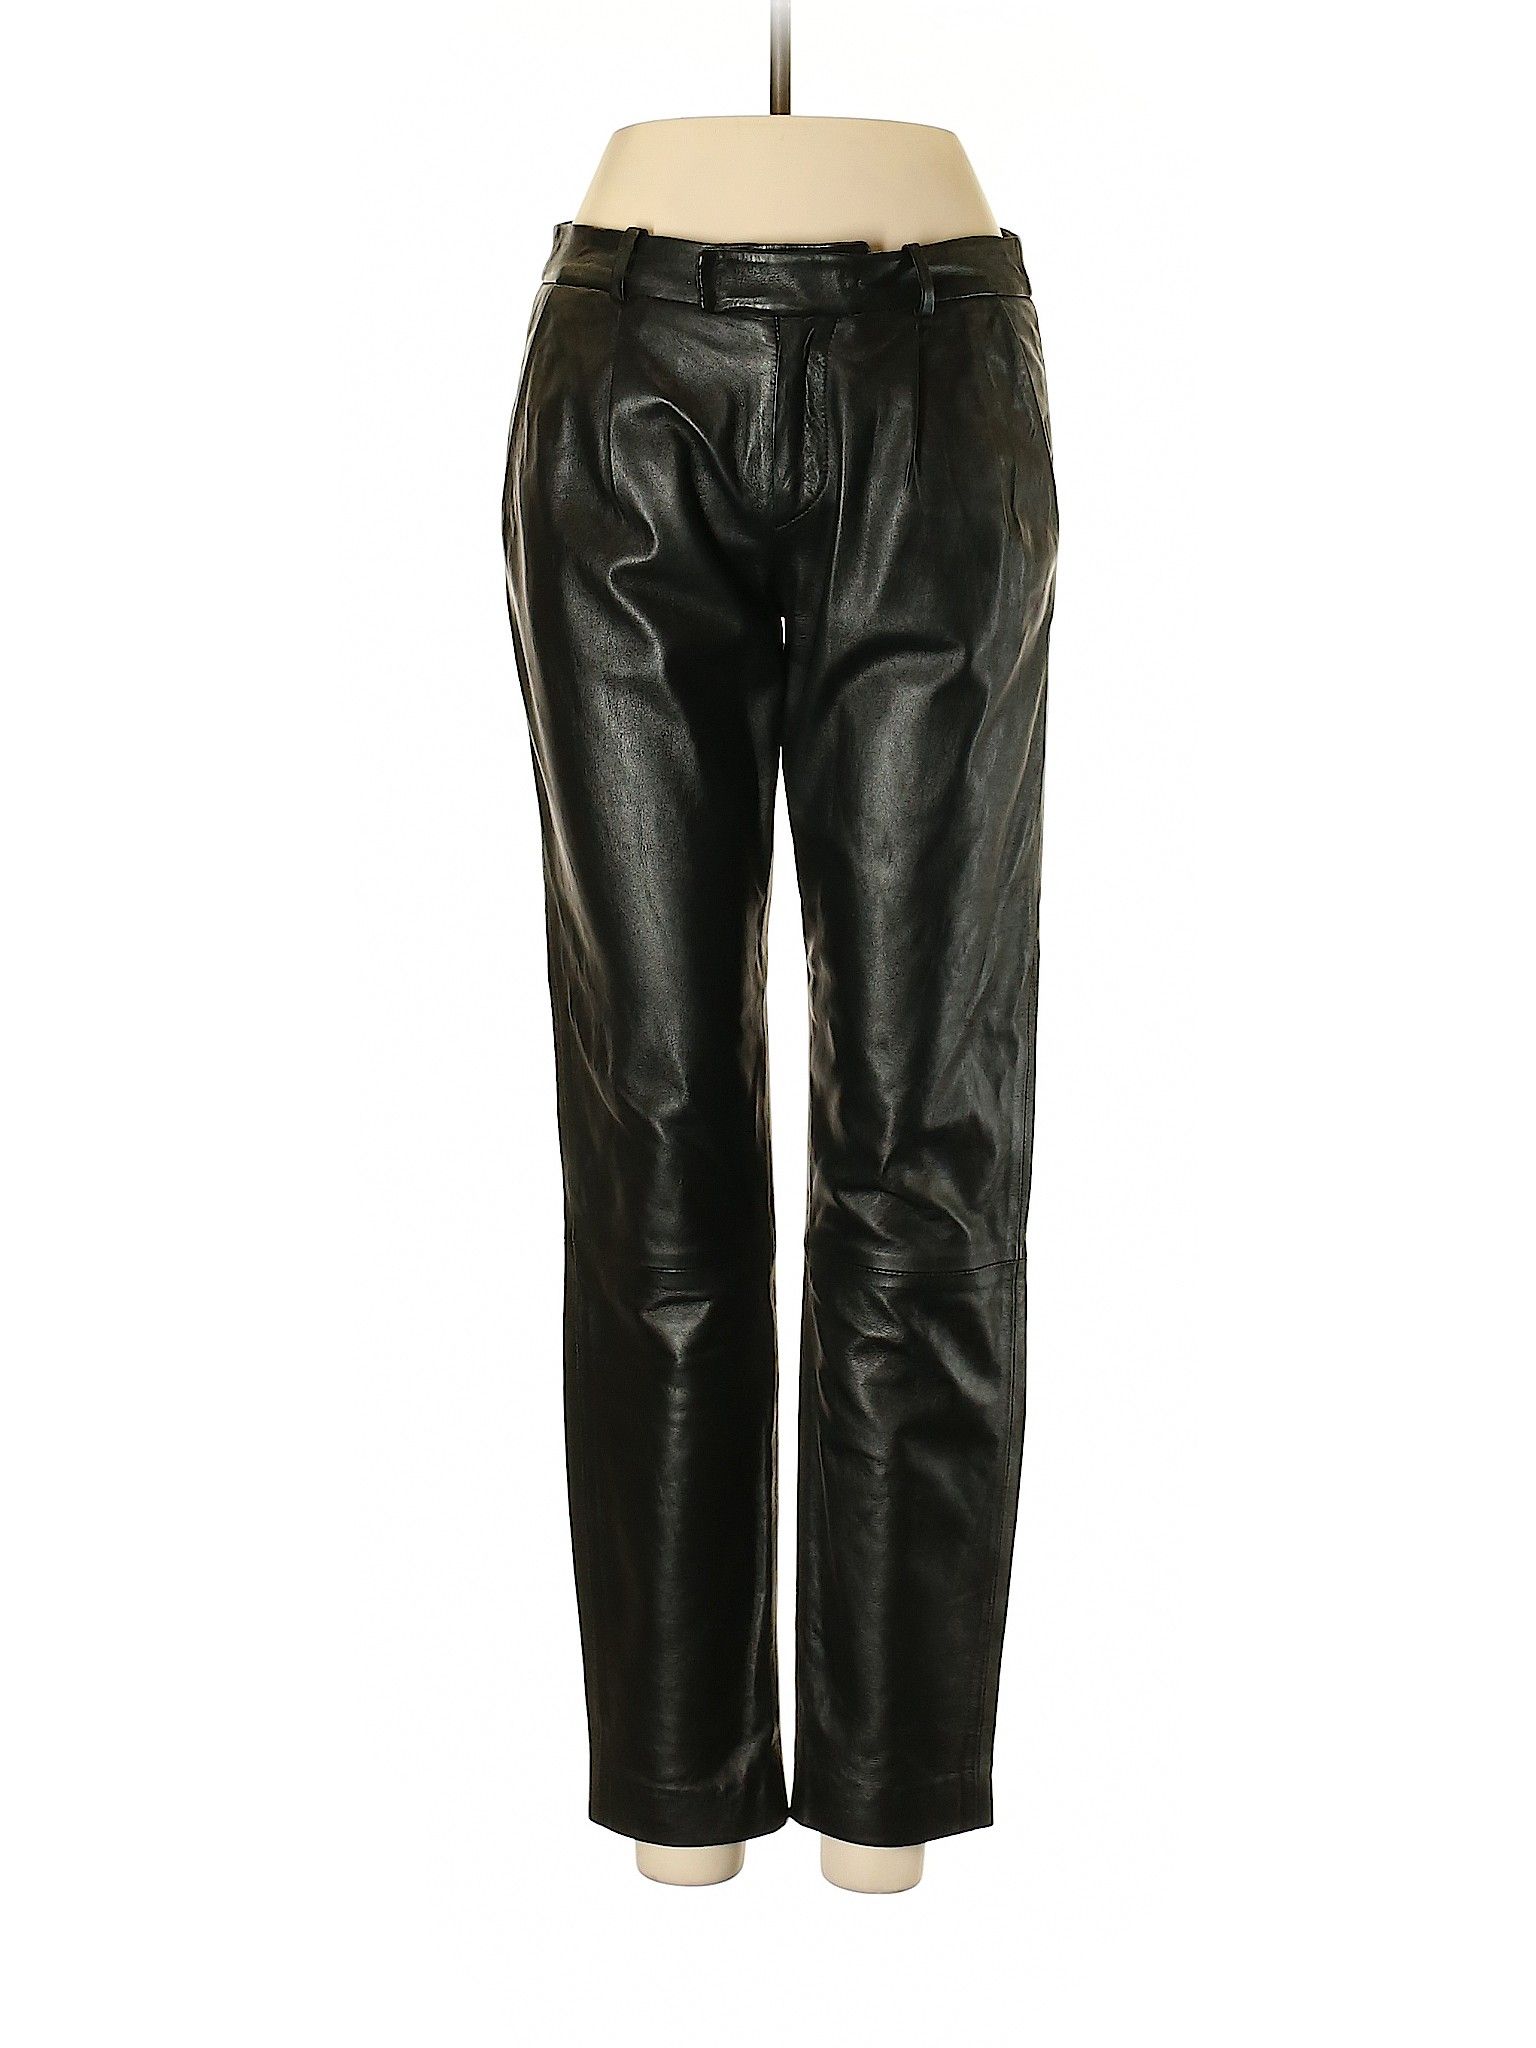 RED Valentino Leather Pants Size 2: Black Women's Bottoms - 43602232 | thredUP